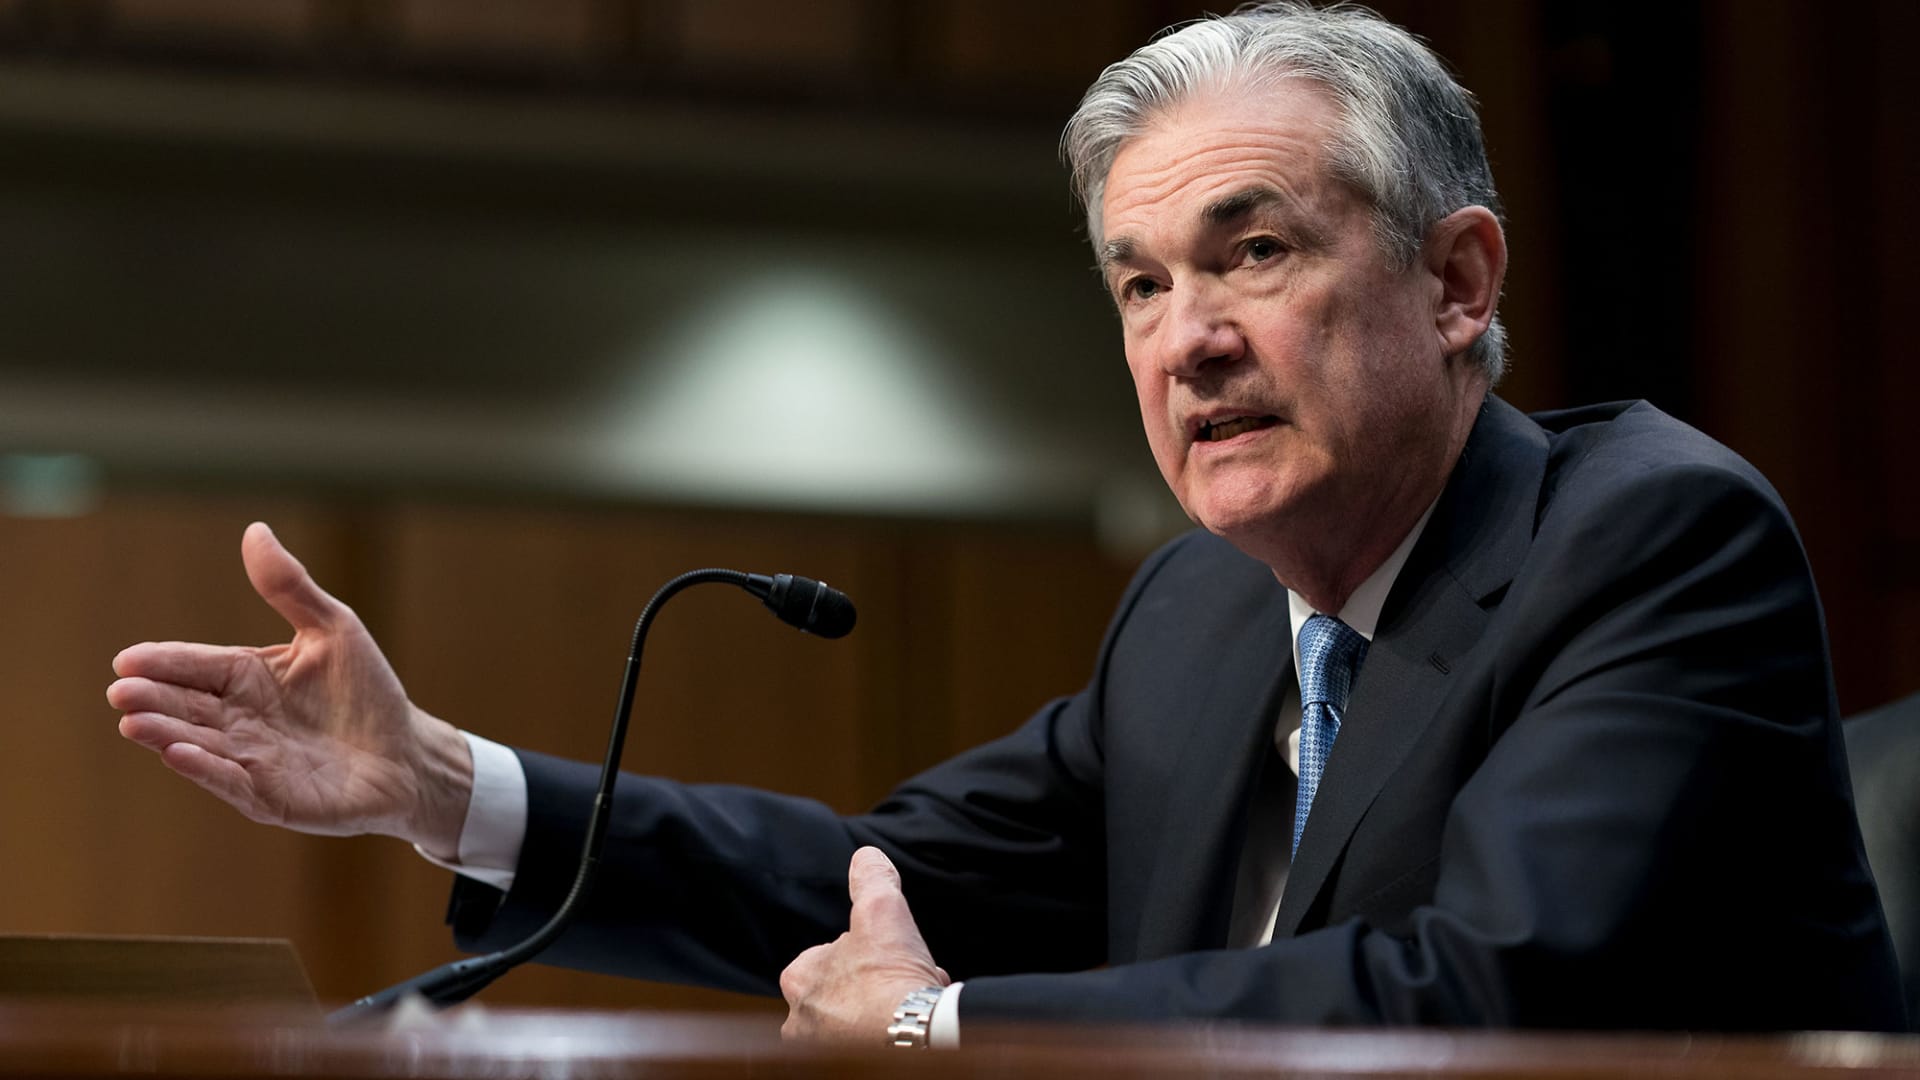 the Fed needs to slow down or 'stuff is going to break'